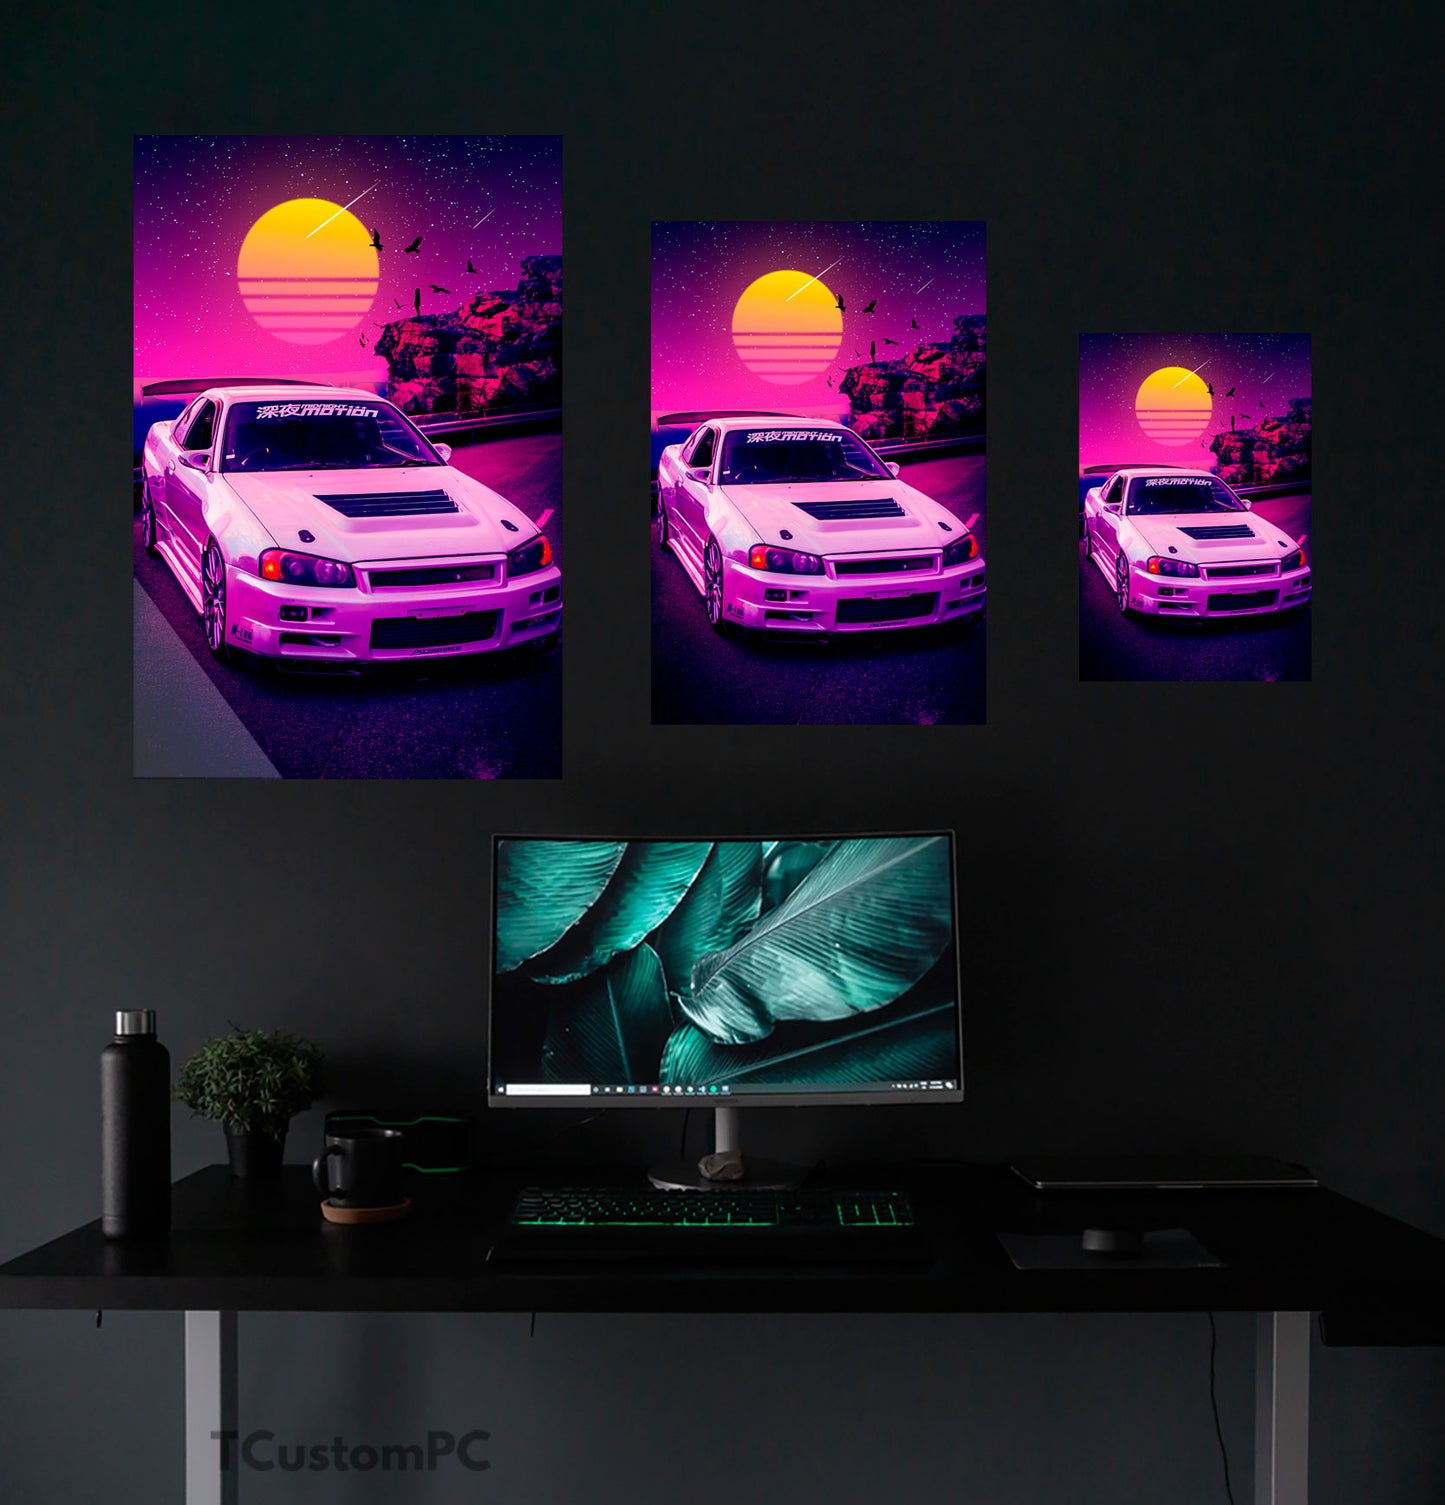 Poster/ Painting of Sports Car Nissan "Skyline Sunset"